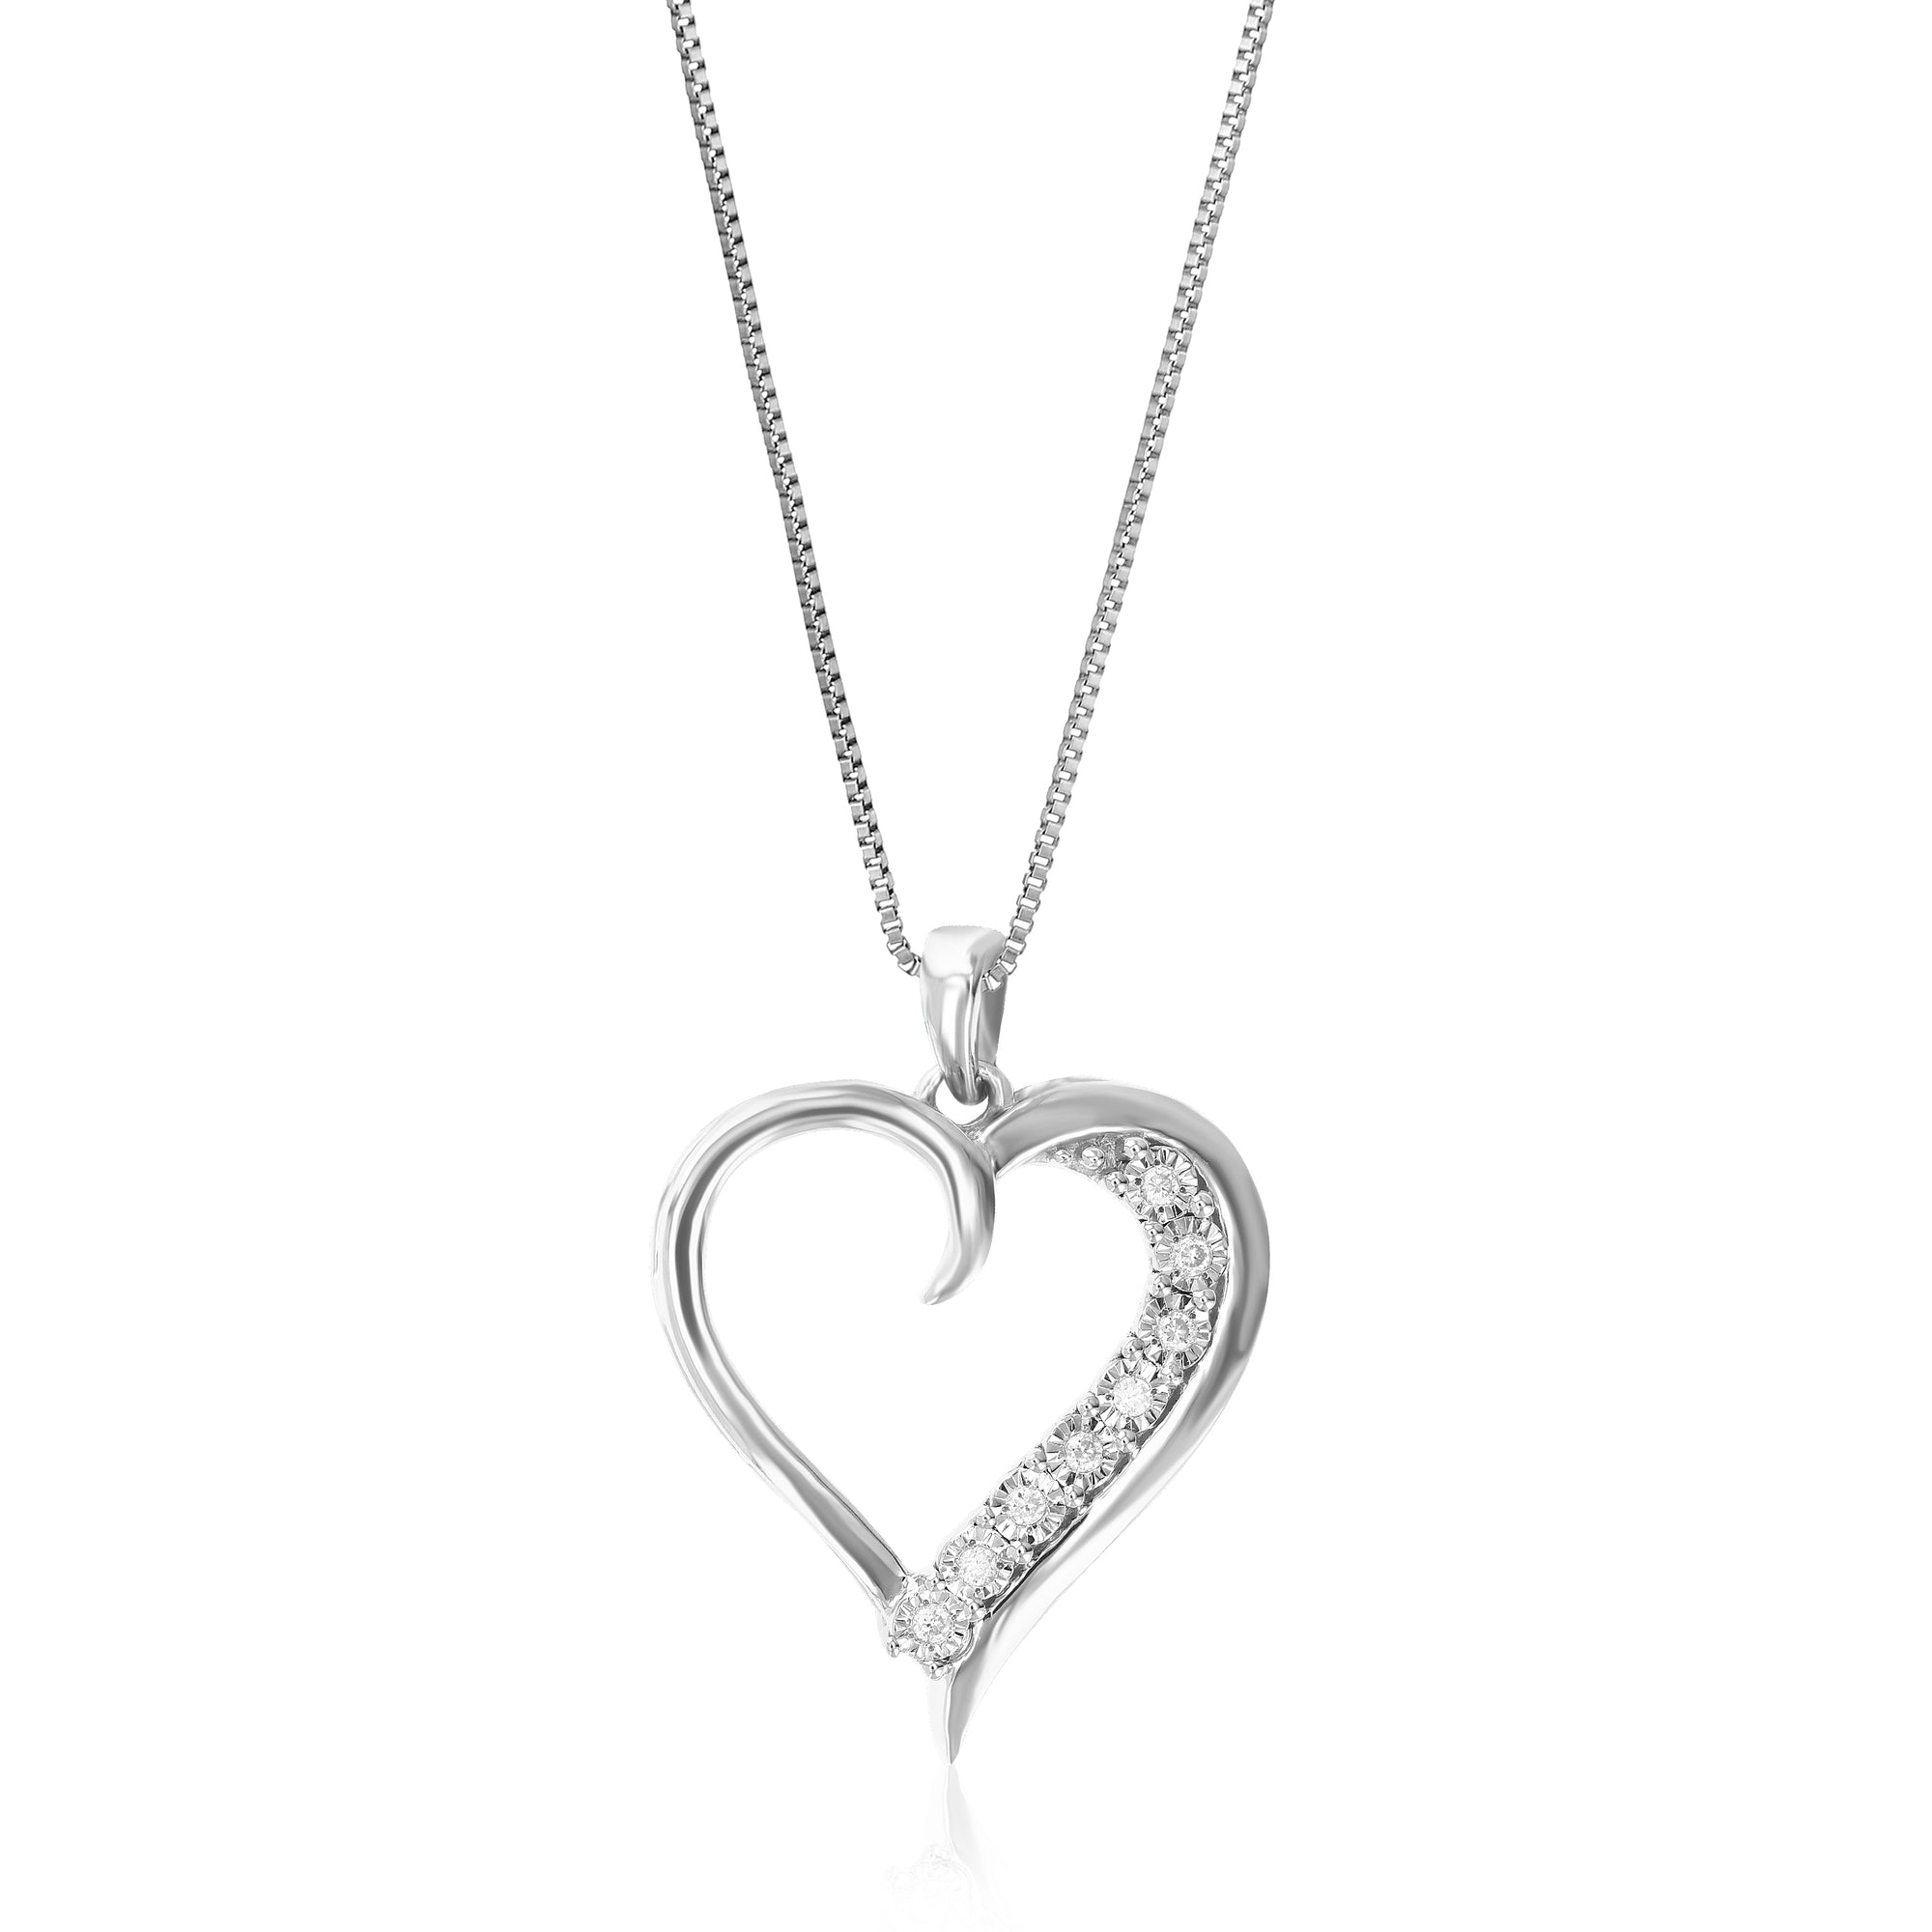 1/14 cttw Diamond Pendant Necklace for Women, Lab Grown Diamond Heart Pendant Necklace in .925 Sterling Silver with Chain, Size 1 Inch